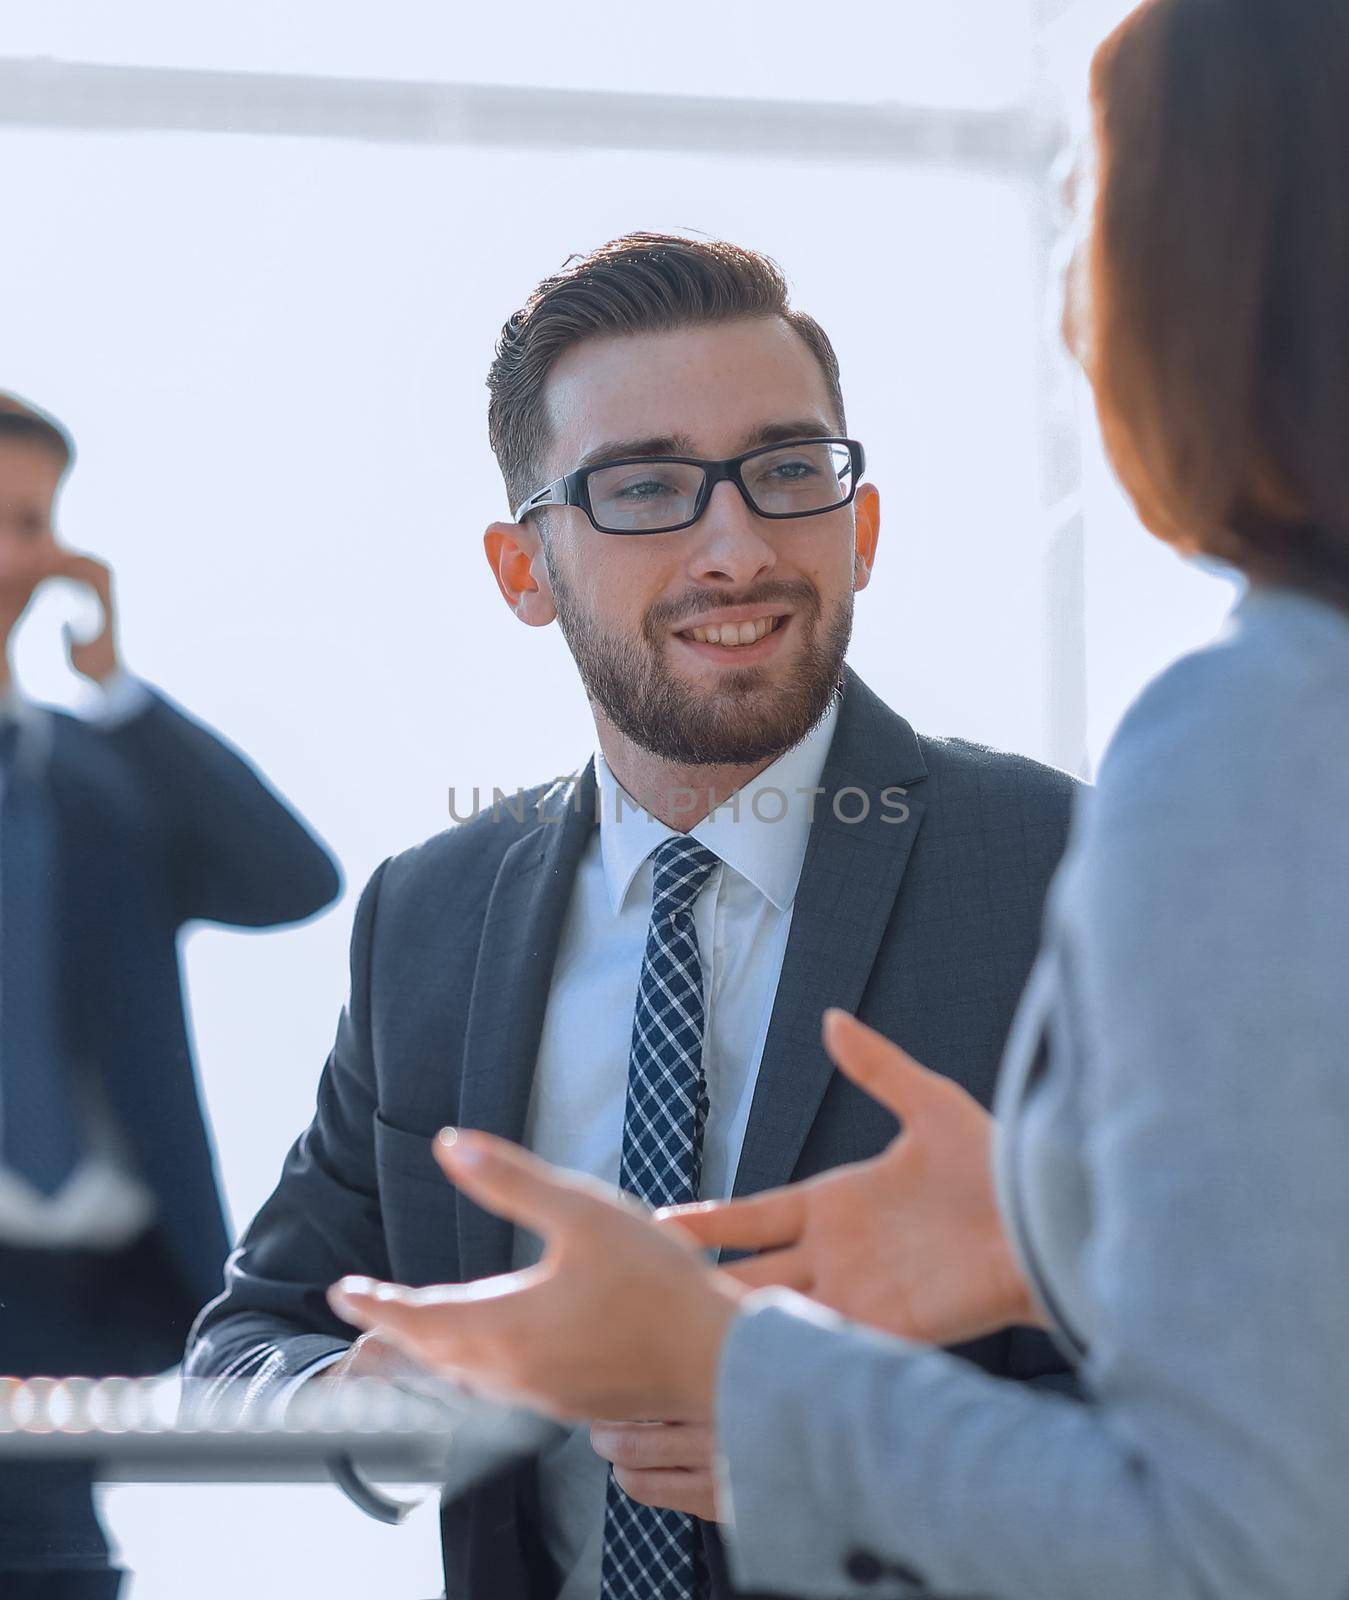 Confident man talking to his interviewer during a job interview by asdf